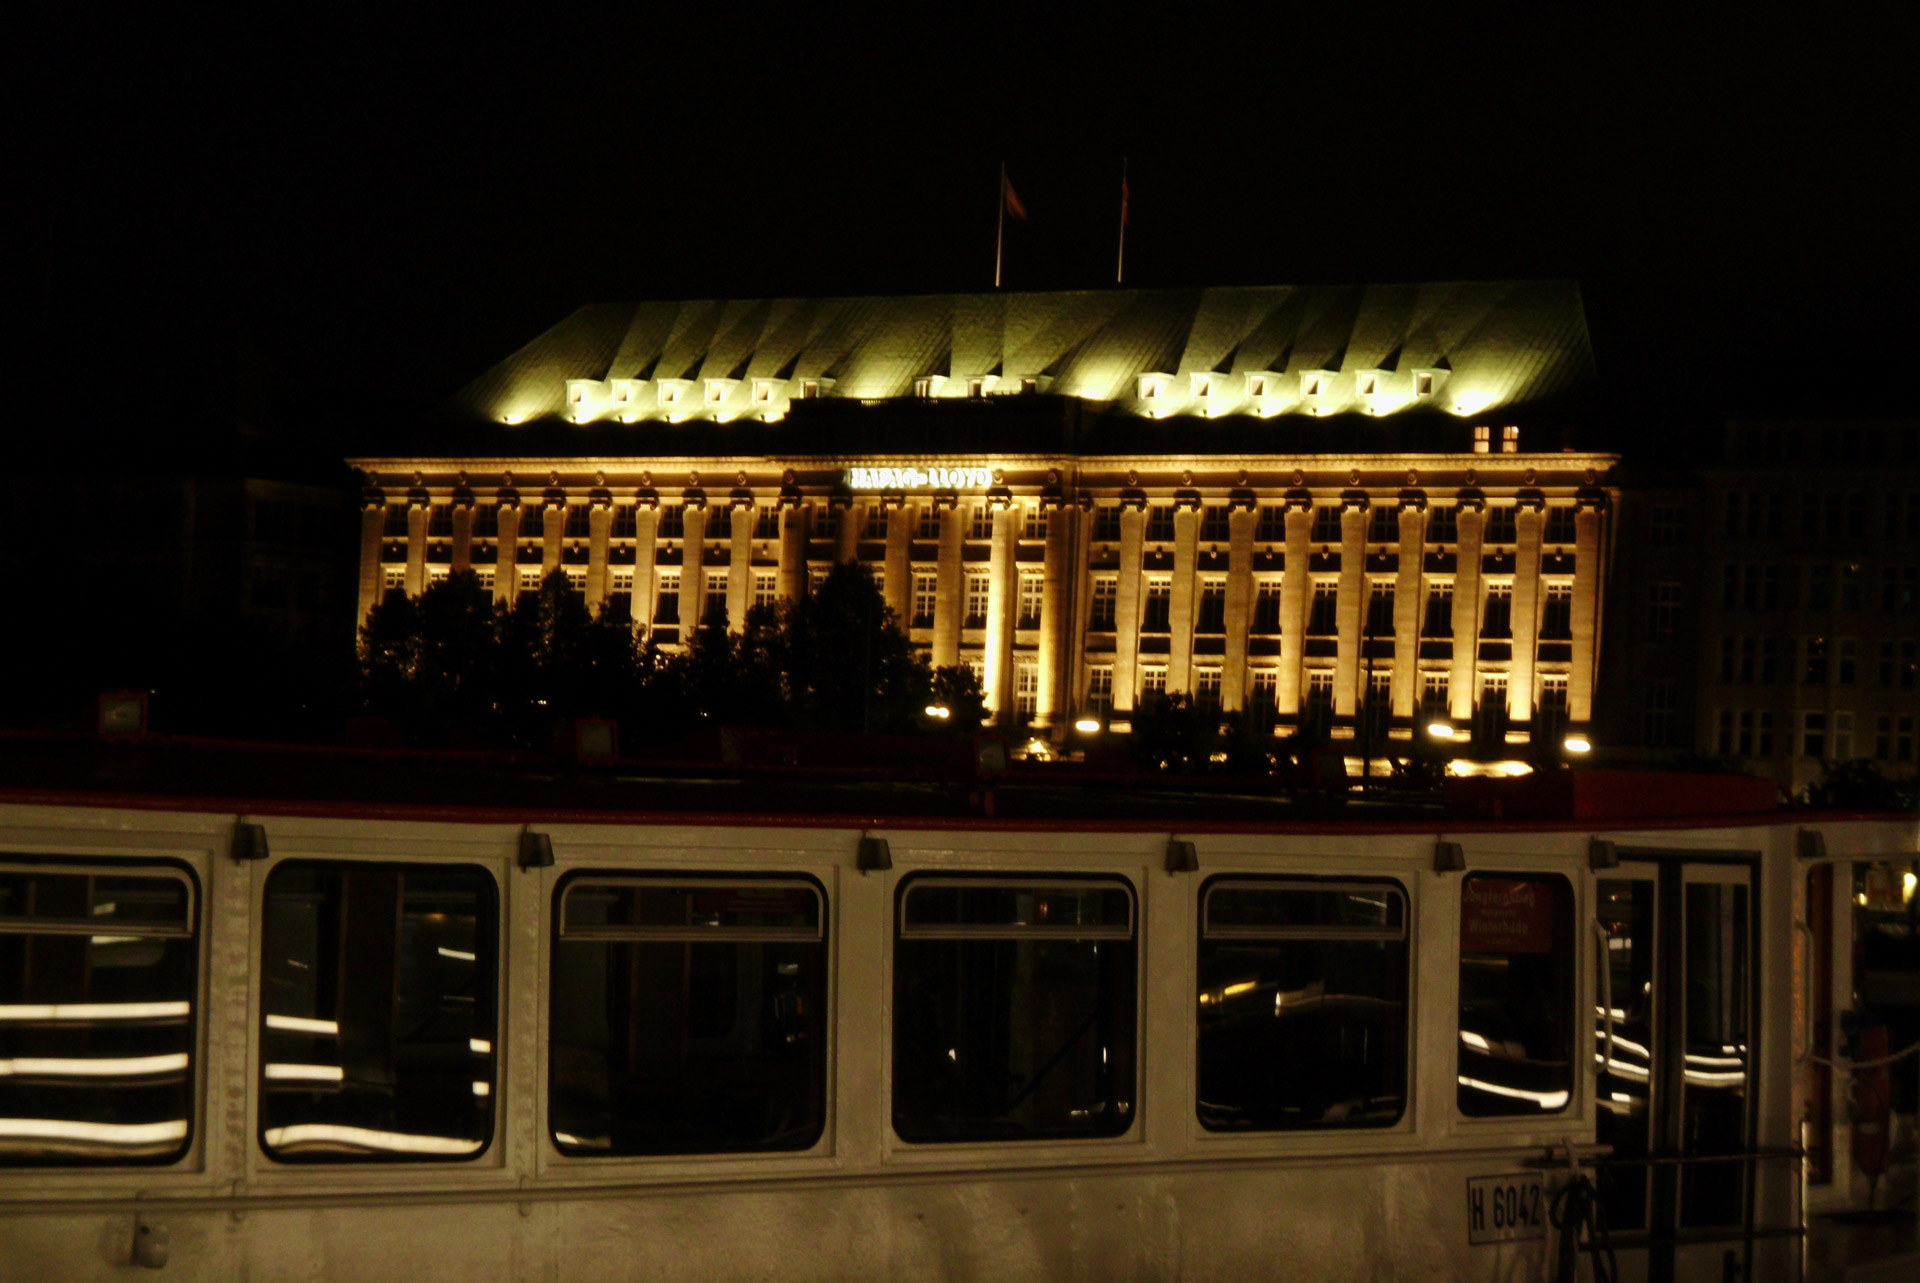 the Hapag-Lloyd building at the Alster in Hamburg